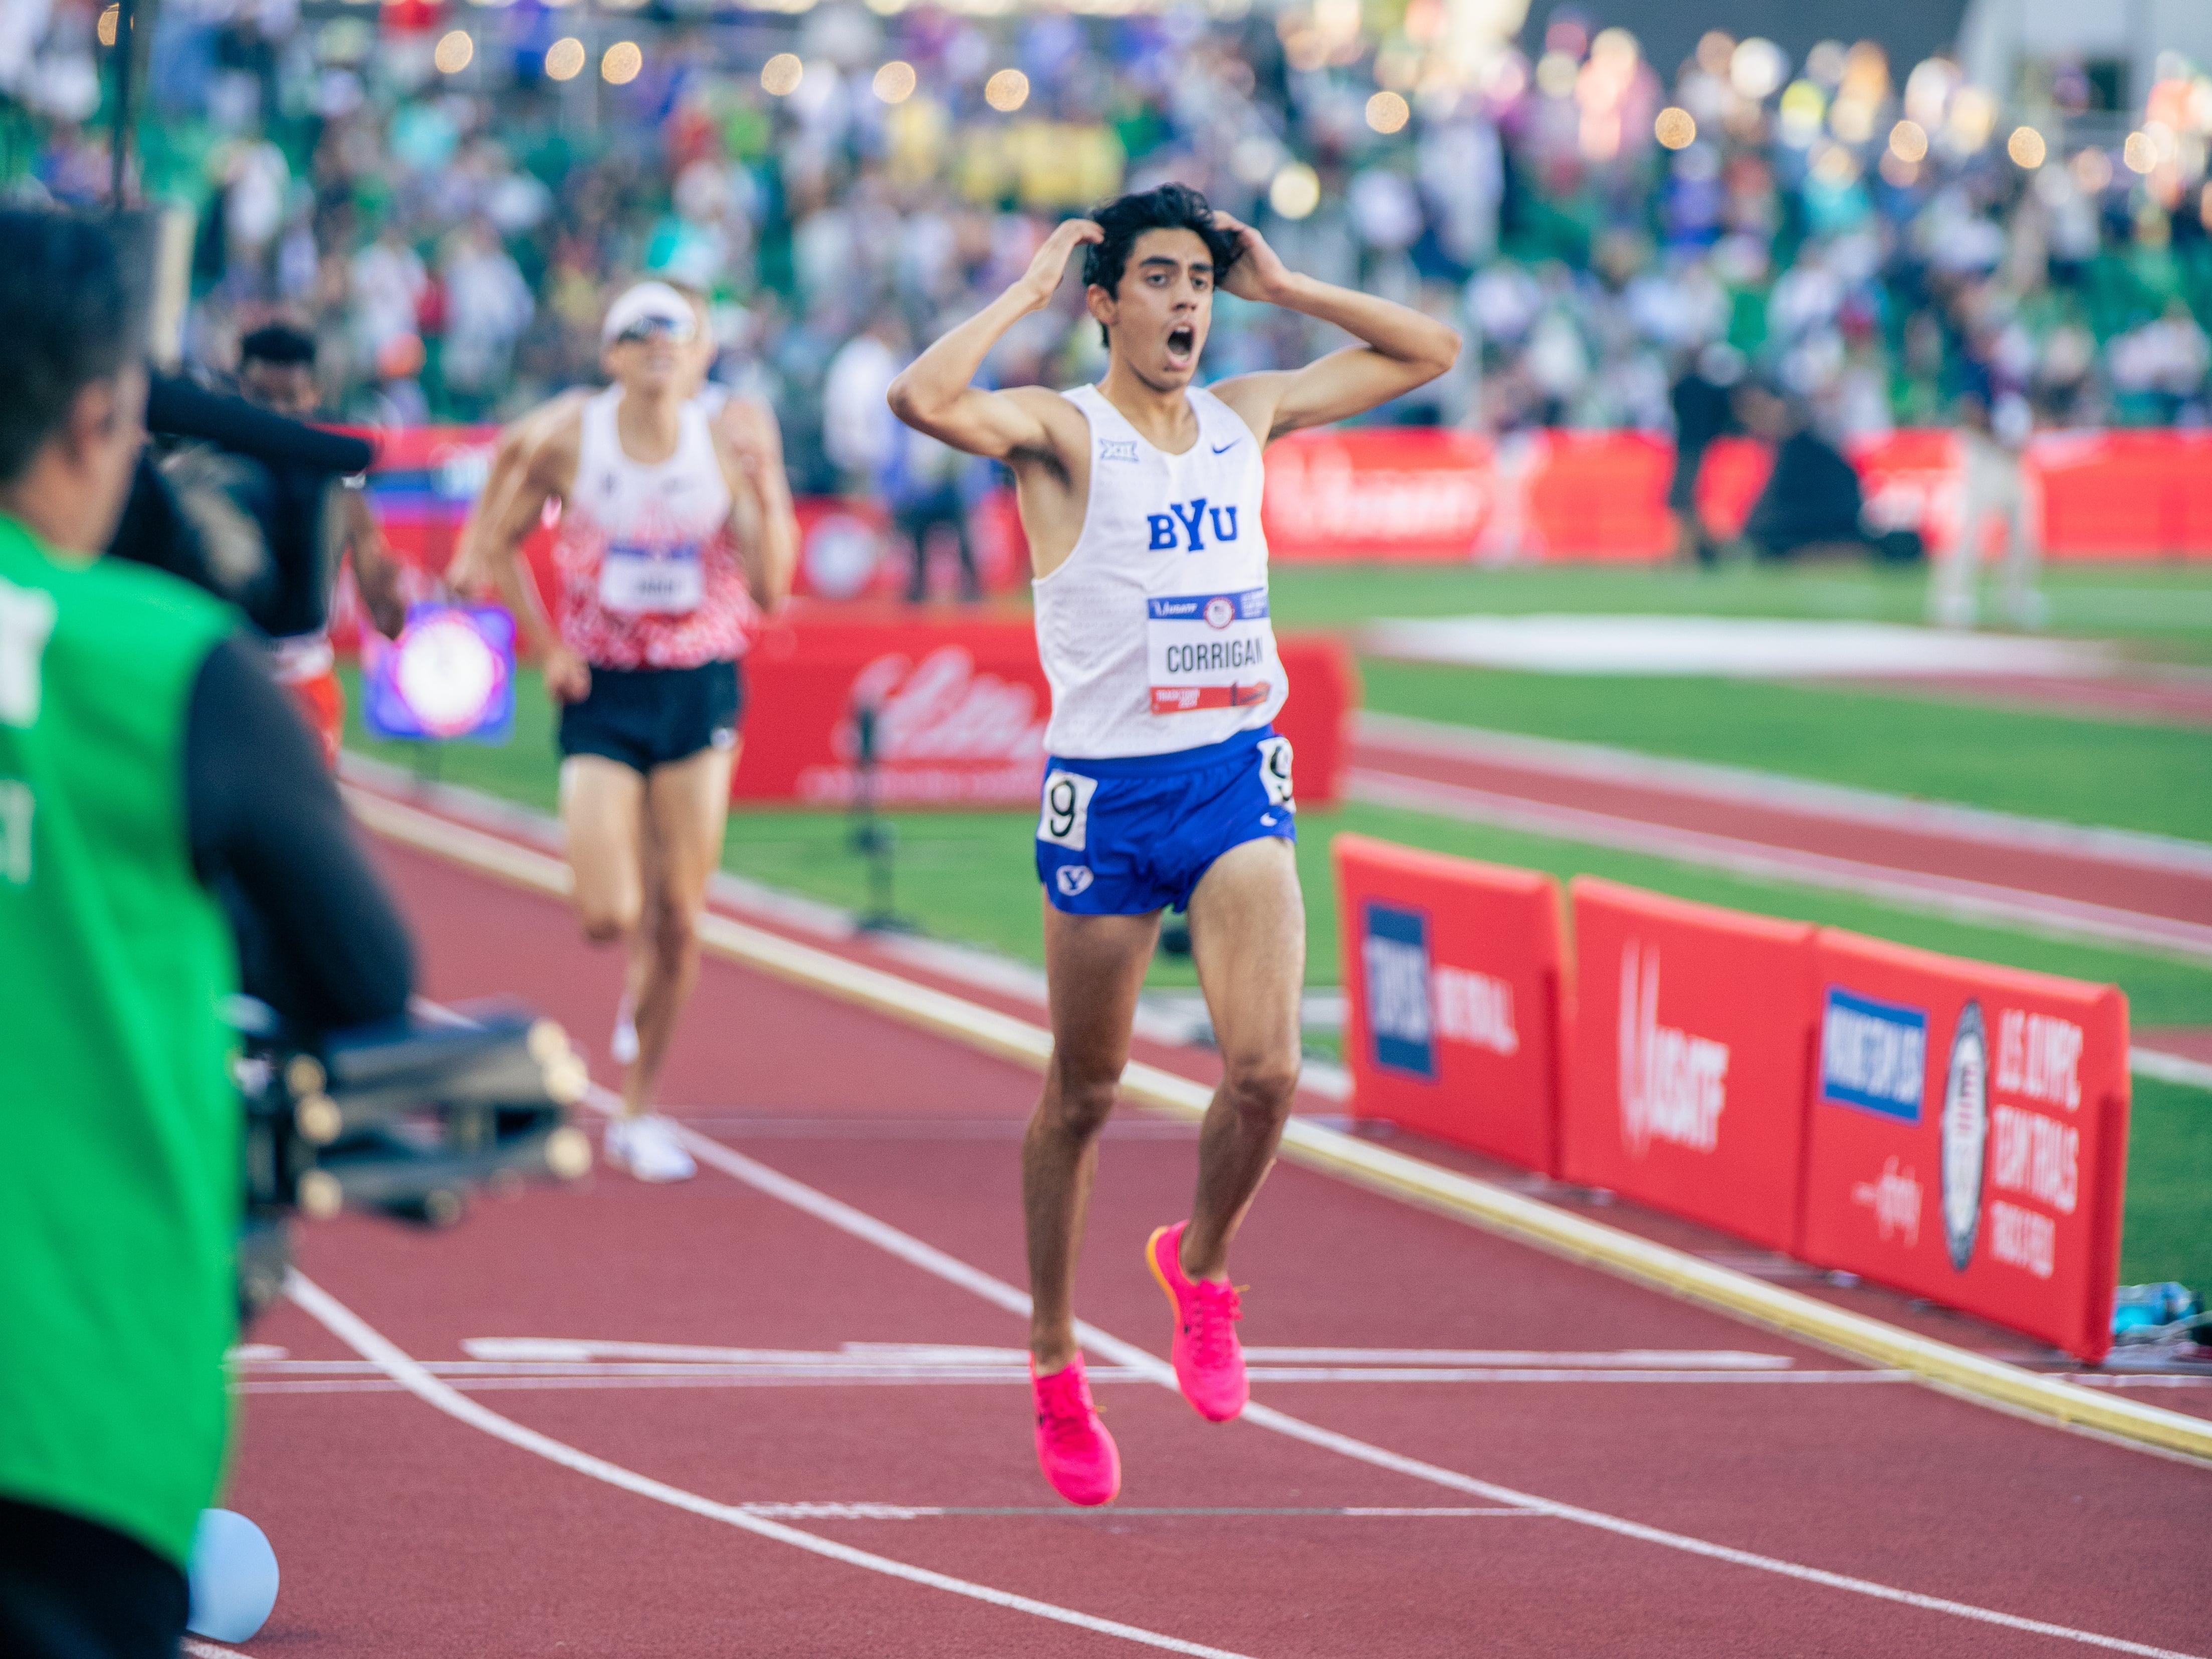 (Zach Hunter | BYU Athletics) BYU runner James Corrigan finishes third in the 3,000-meter steeplechase at the 2024 U.S. Olympic Trials in Eugene, Ore., Sunday, June 23, 2024. Corrigan needed another race to punch his ticket to the Paris Olympics.